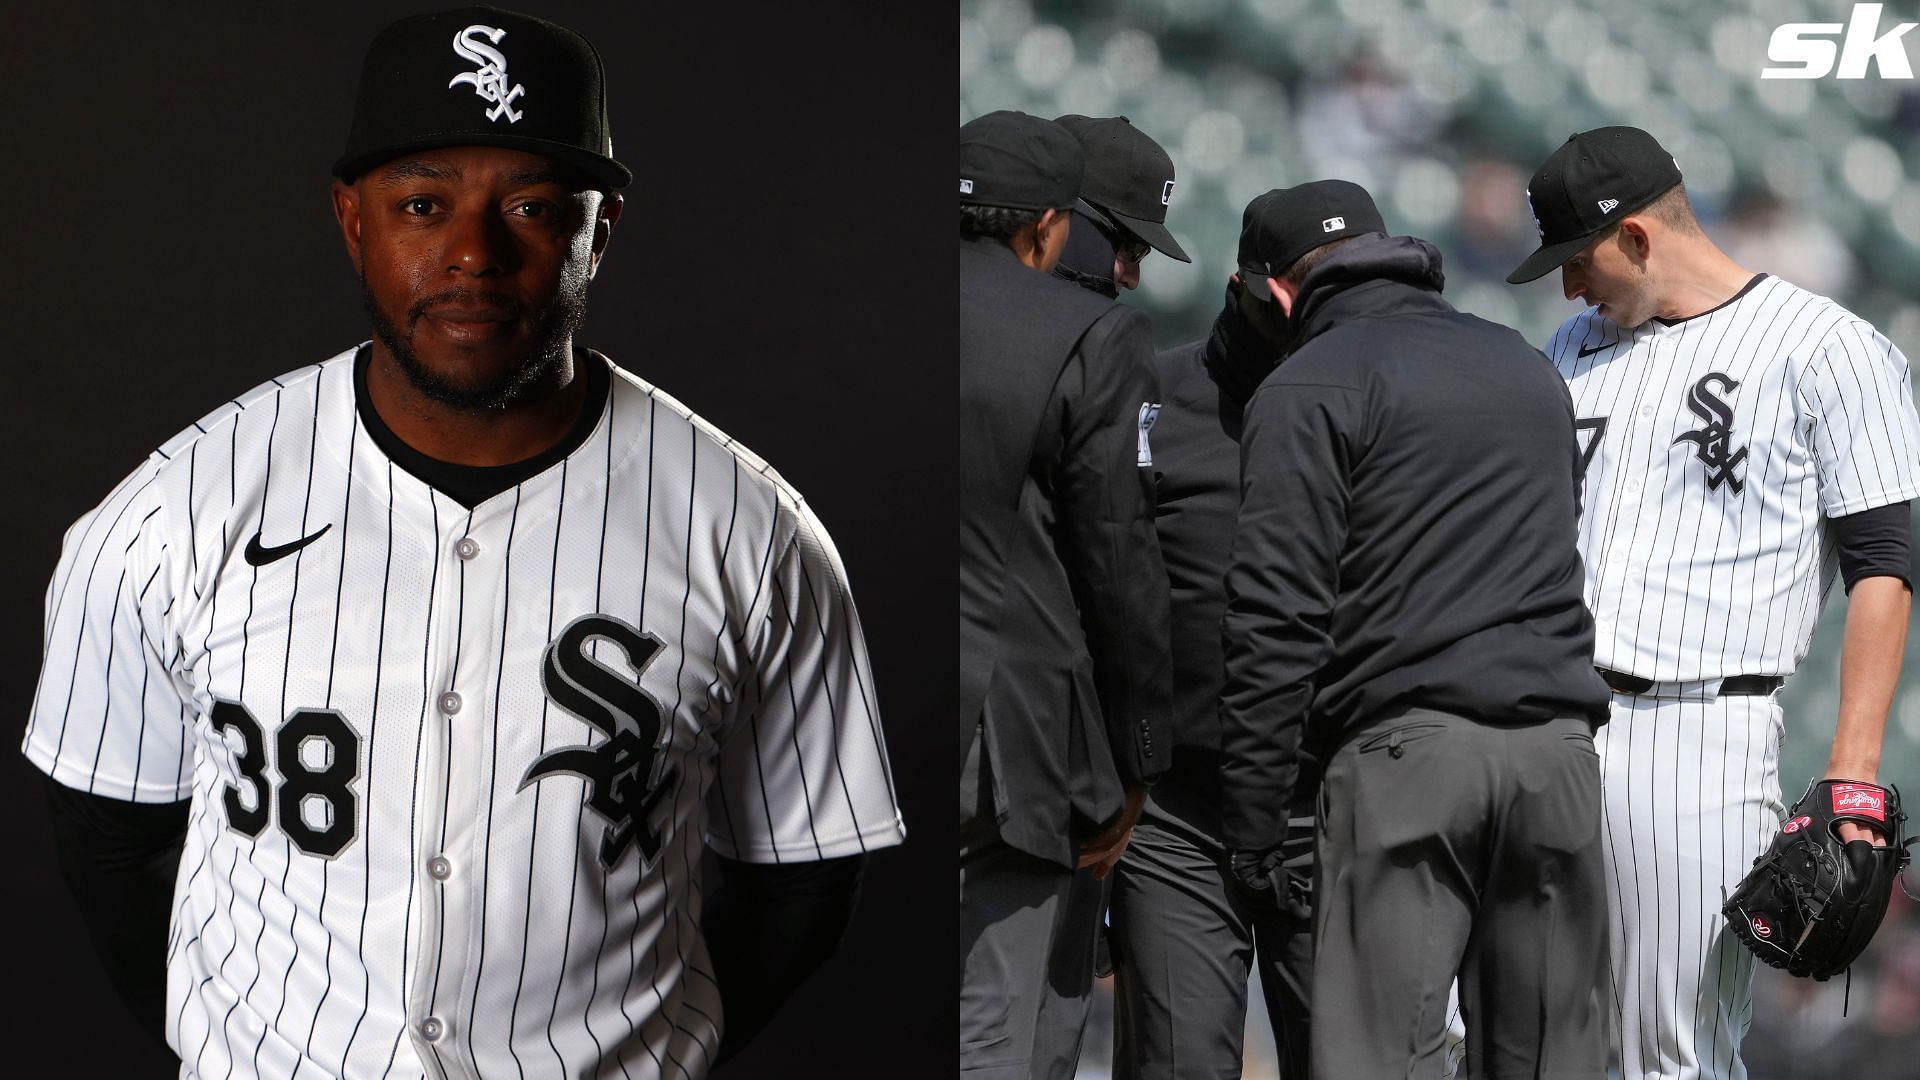 WATCH: White Sox game faces bizarre delay after first base coach goes MIA